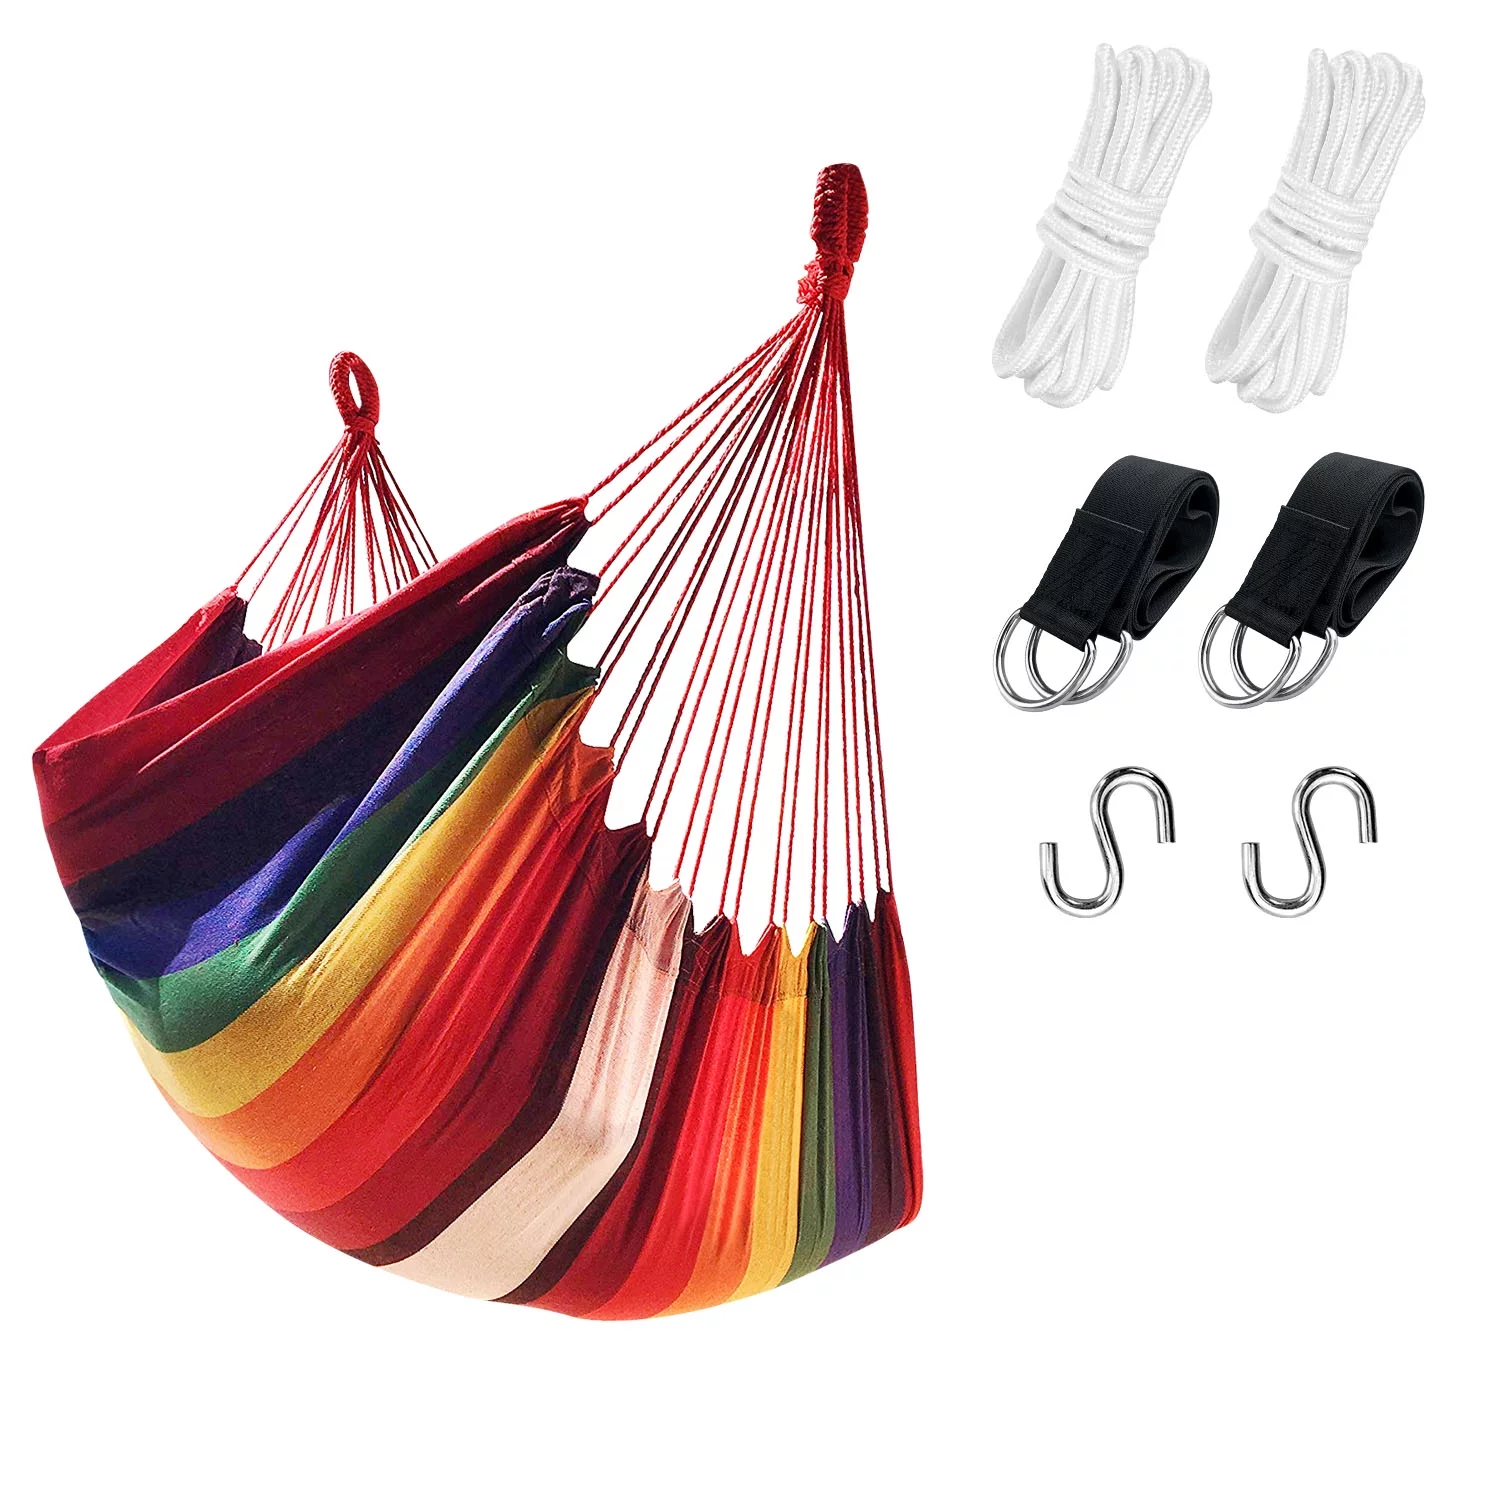 Livhil Hammock Chair Hanging Rope Hammock Swing Chair, Max 300 lbs Portable Hanging Hammock Chair with Pocket- Perfect for Outdoor, Home, Bedroom, Patio, Yard (Colorful)